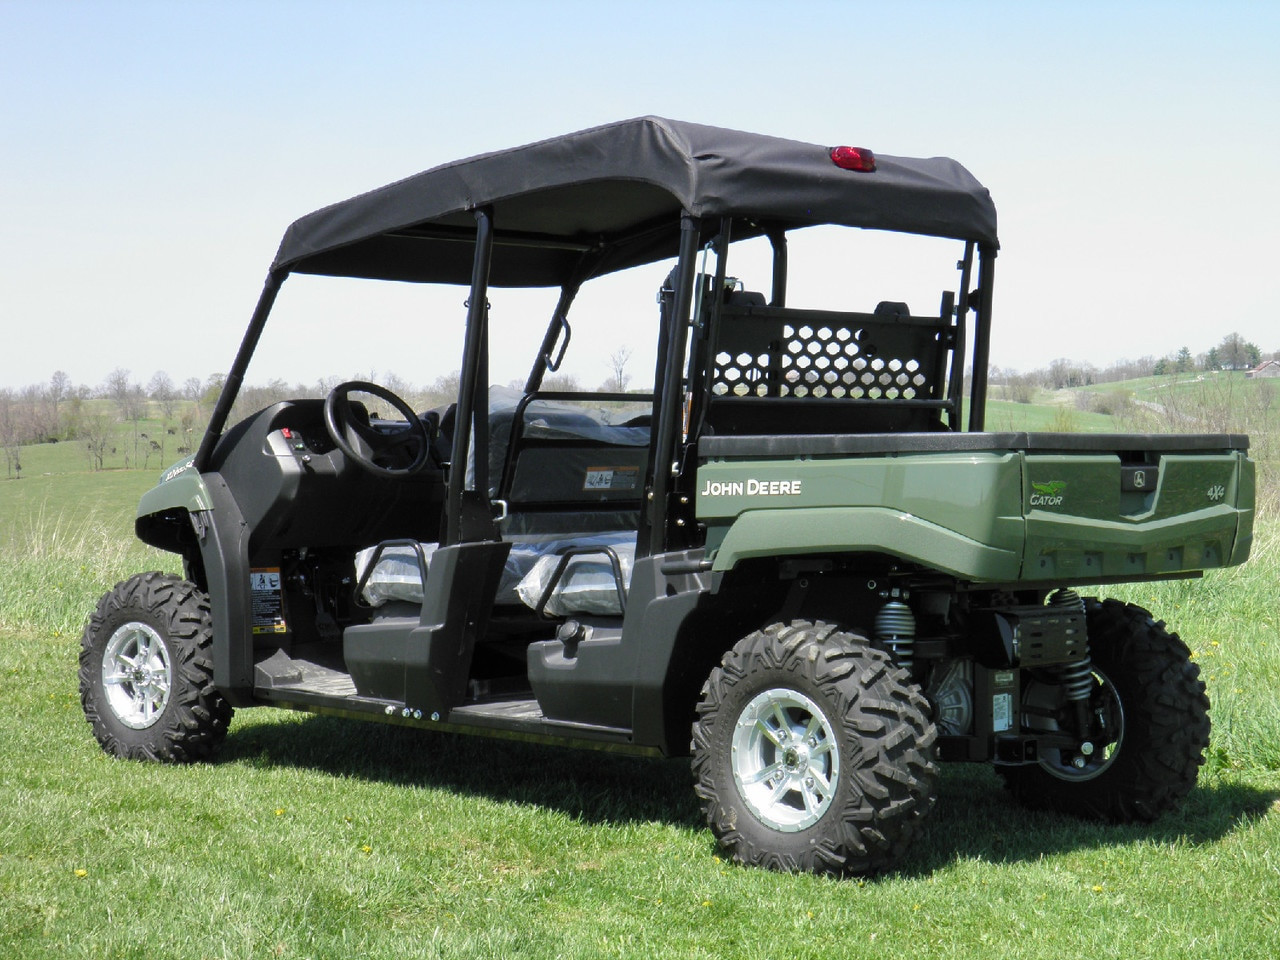 3 Star side x side John Deere Gator UXV 550/560/590 S4 soft top rear and side angle view